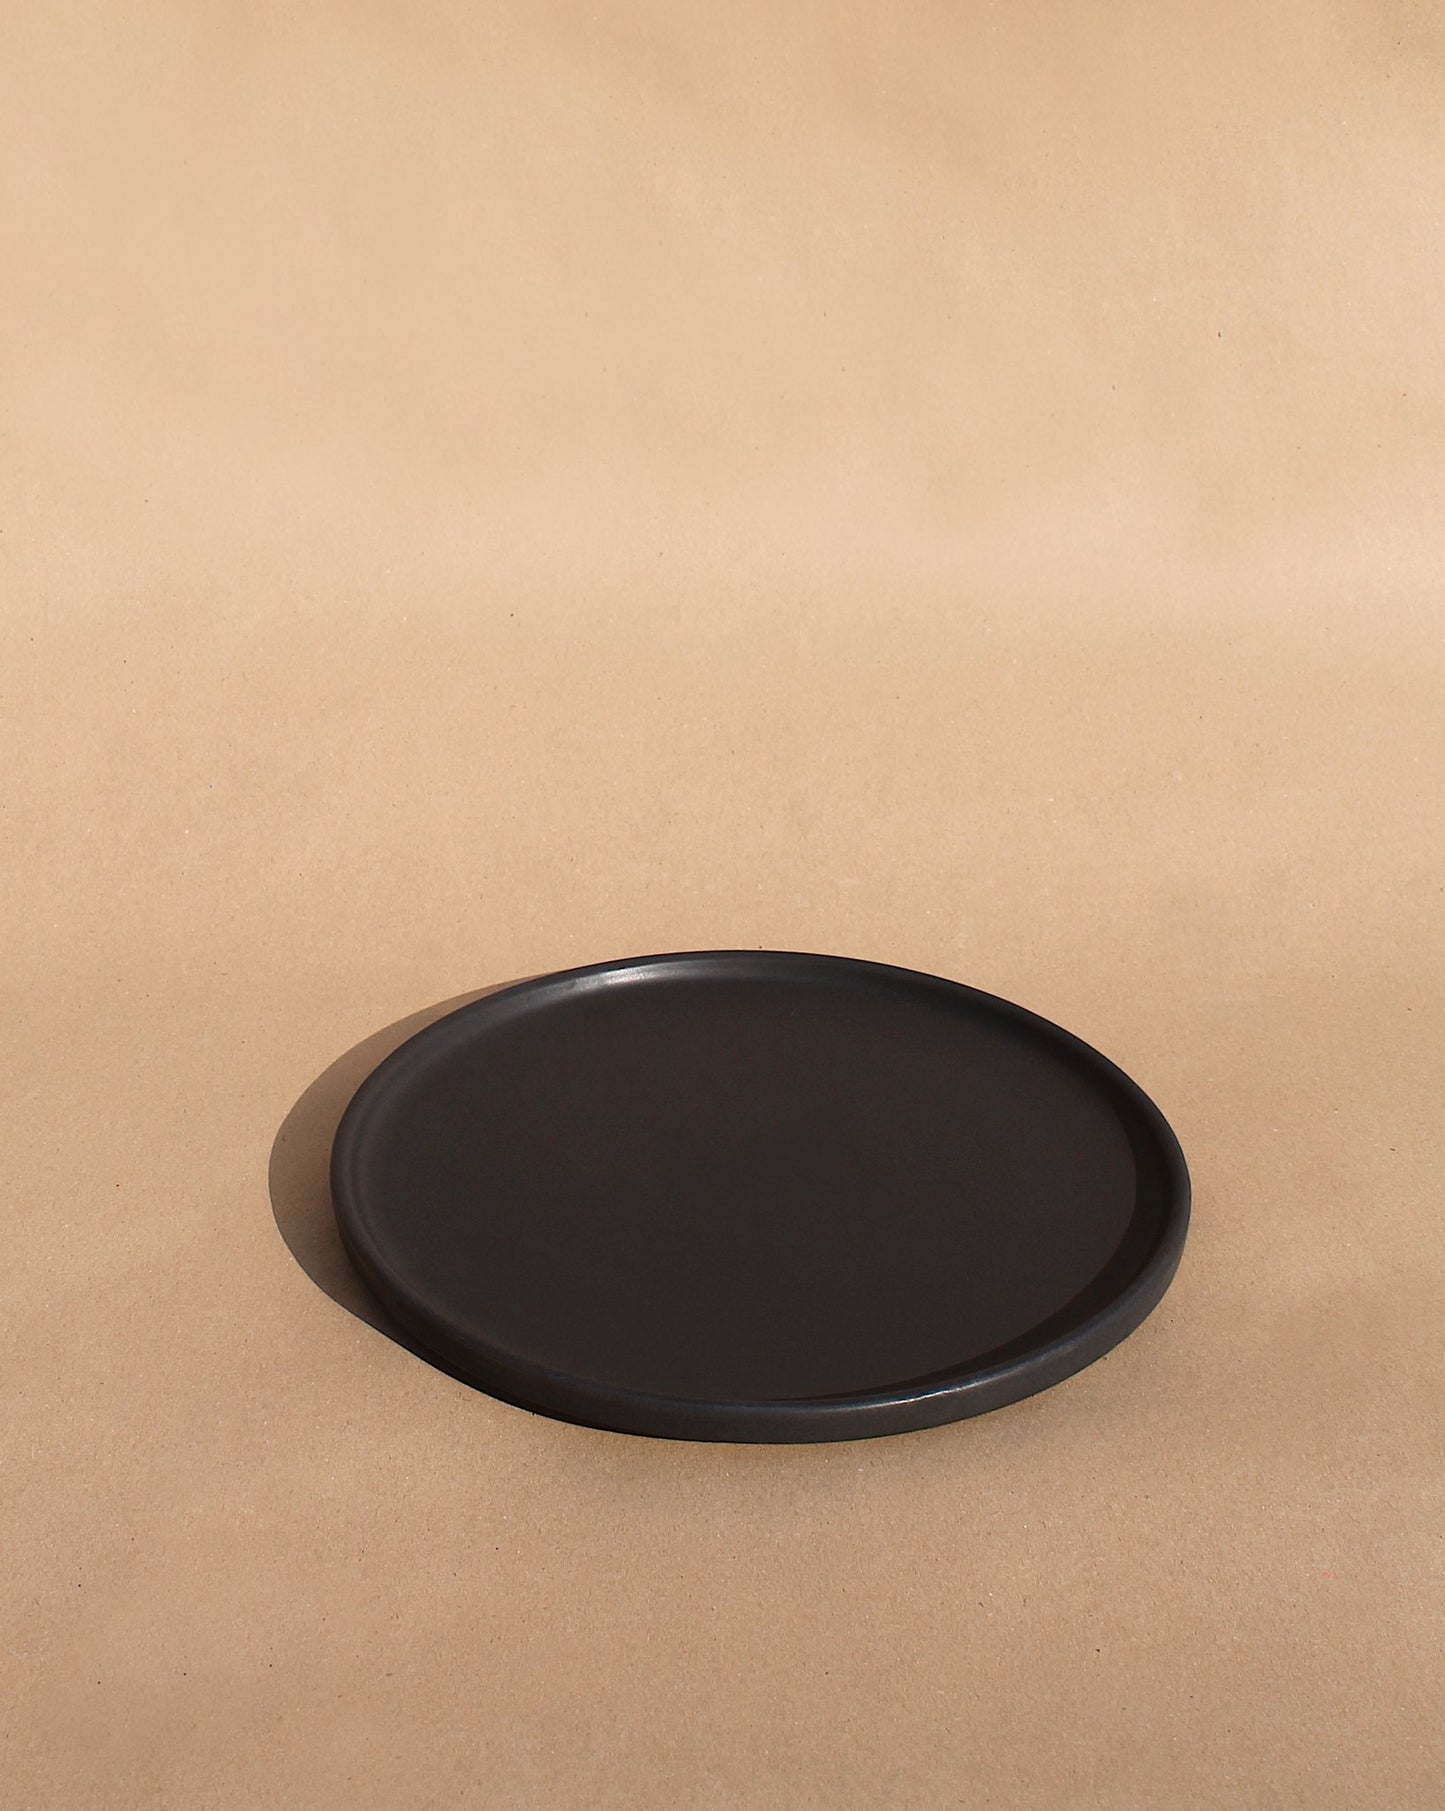 Kanso quarter plate (8"): with rim